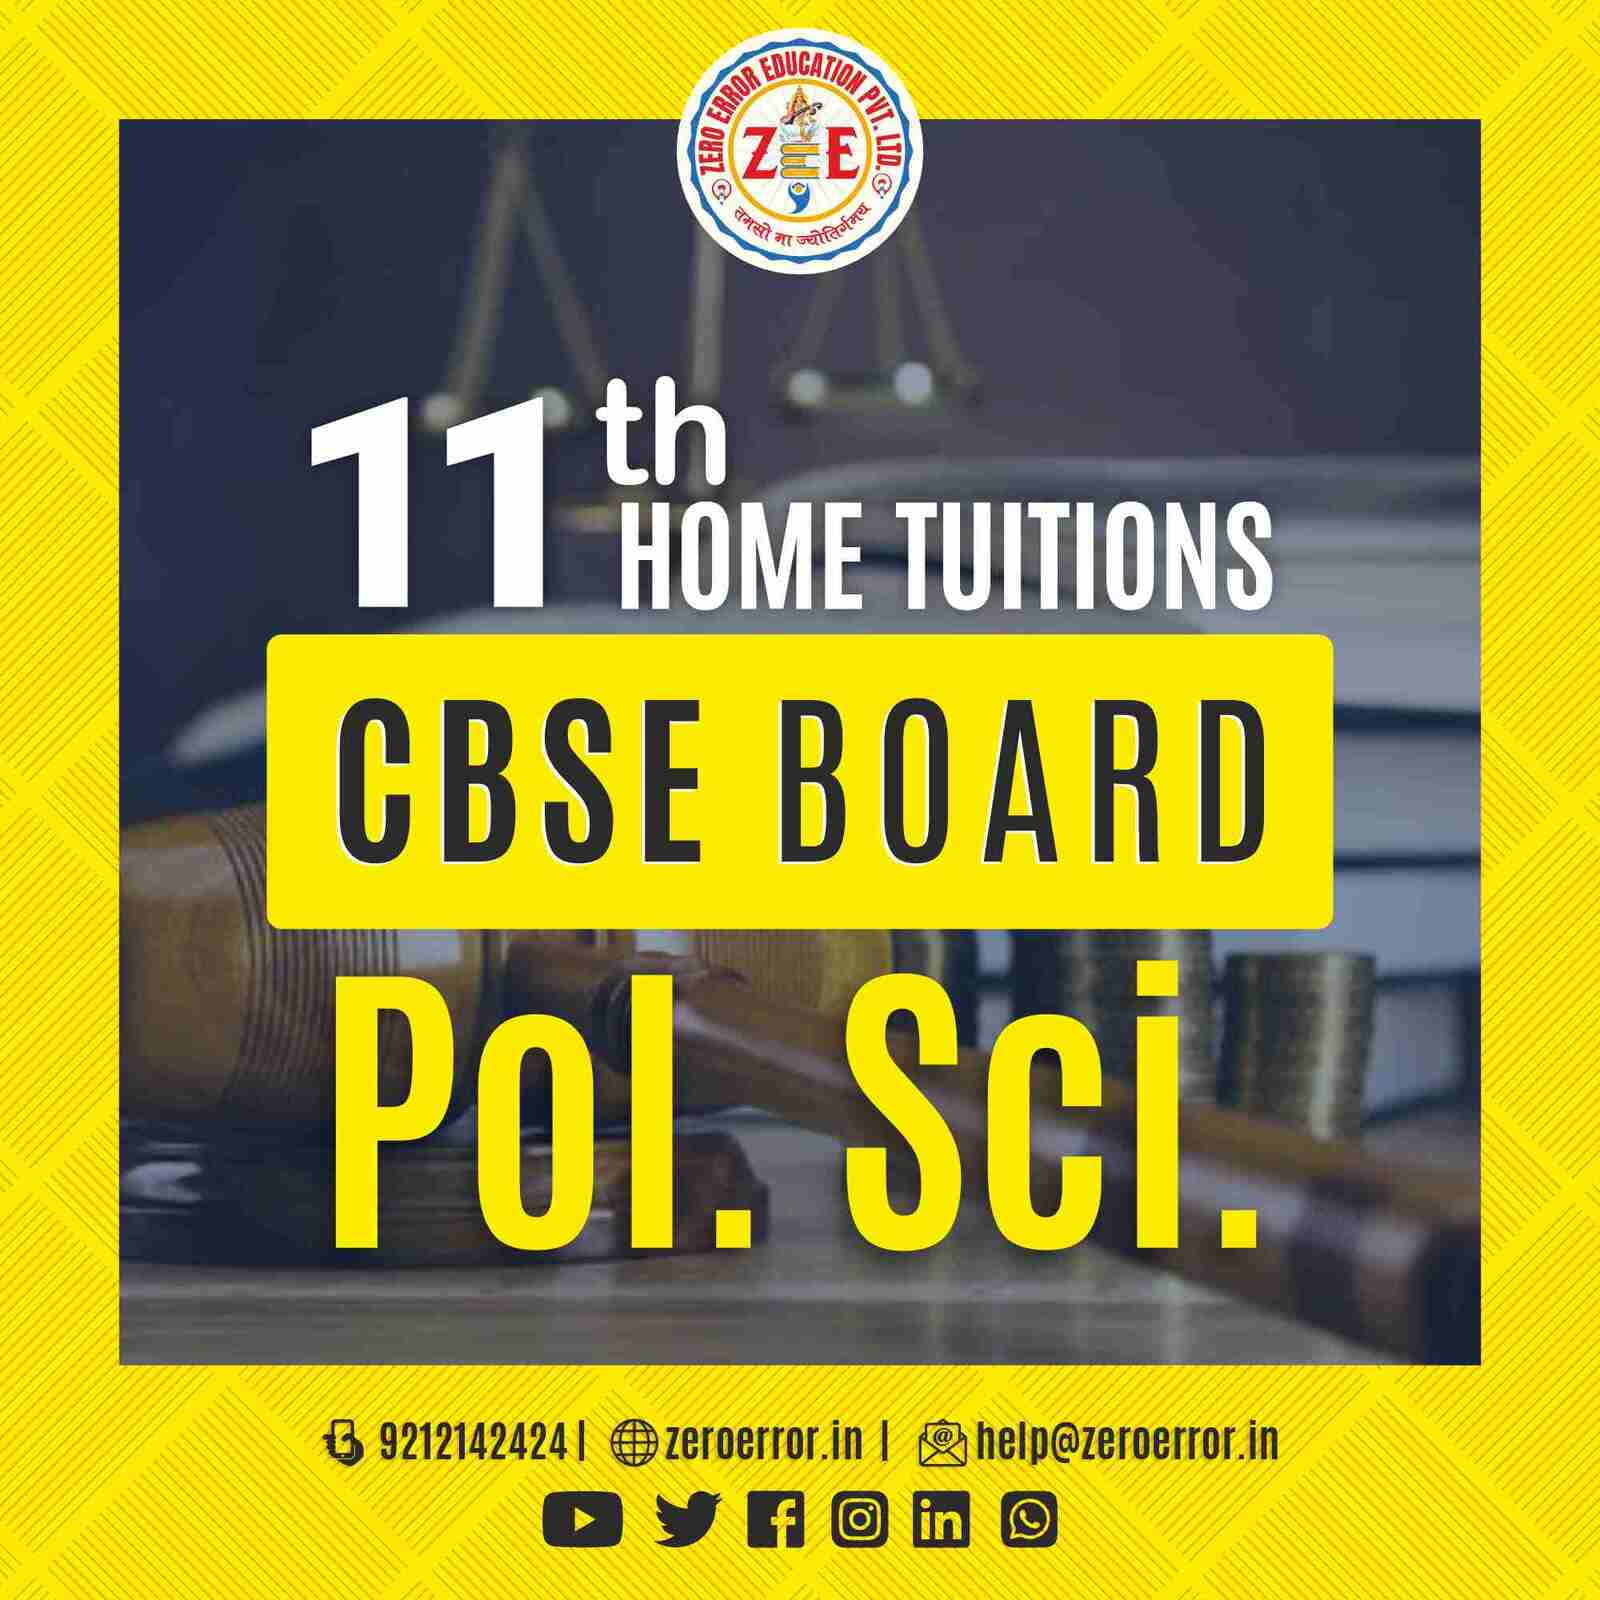 11th Grade CBSE Political Science Online Classes by Zero Error Education Prepare for your CBSE board exams with online and offline Pol Sci classes for 11th grade. Learn from experienced home tutors and get all the help you need to succeed. Enroll today at Zero Error Education. [https://zeroerror.in/] Call 9212142424 for more information.